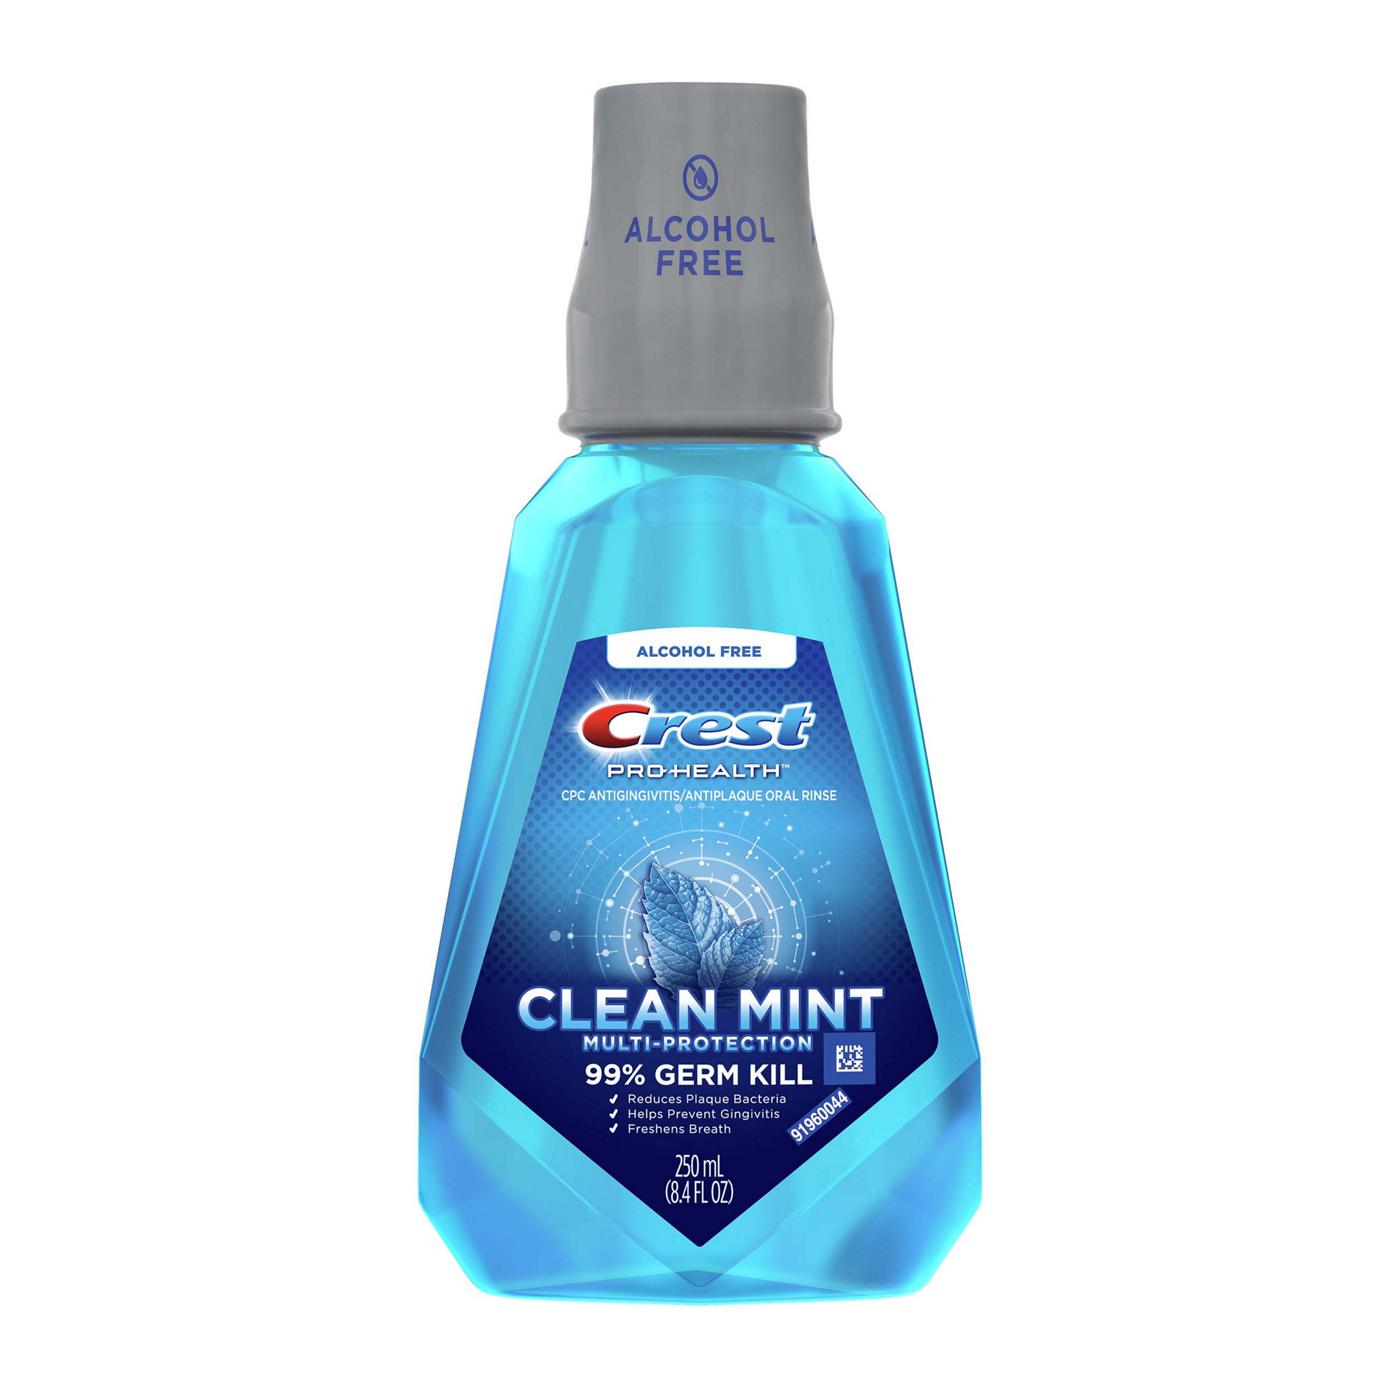 Crest Pro-Health Multi-Protection Mouthwash - Clean Mint; image 1 of 5